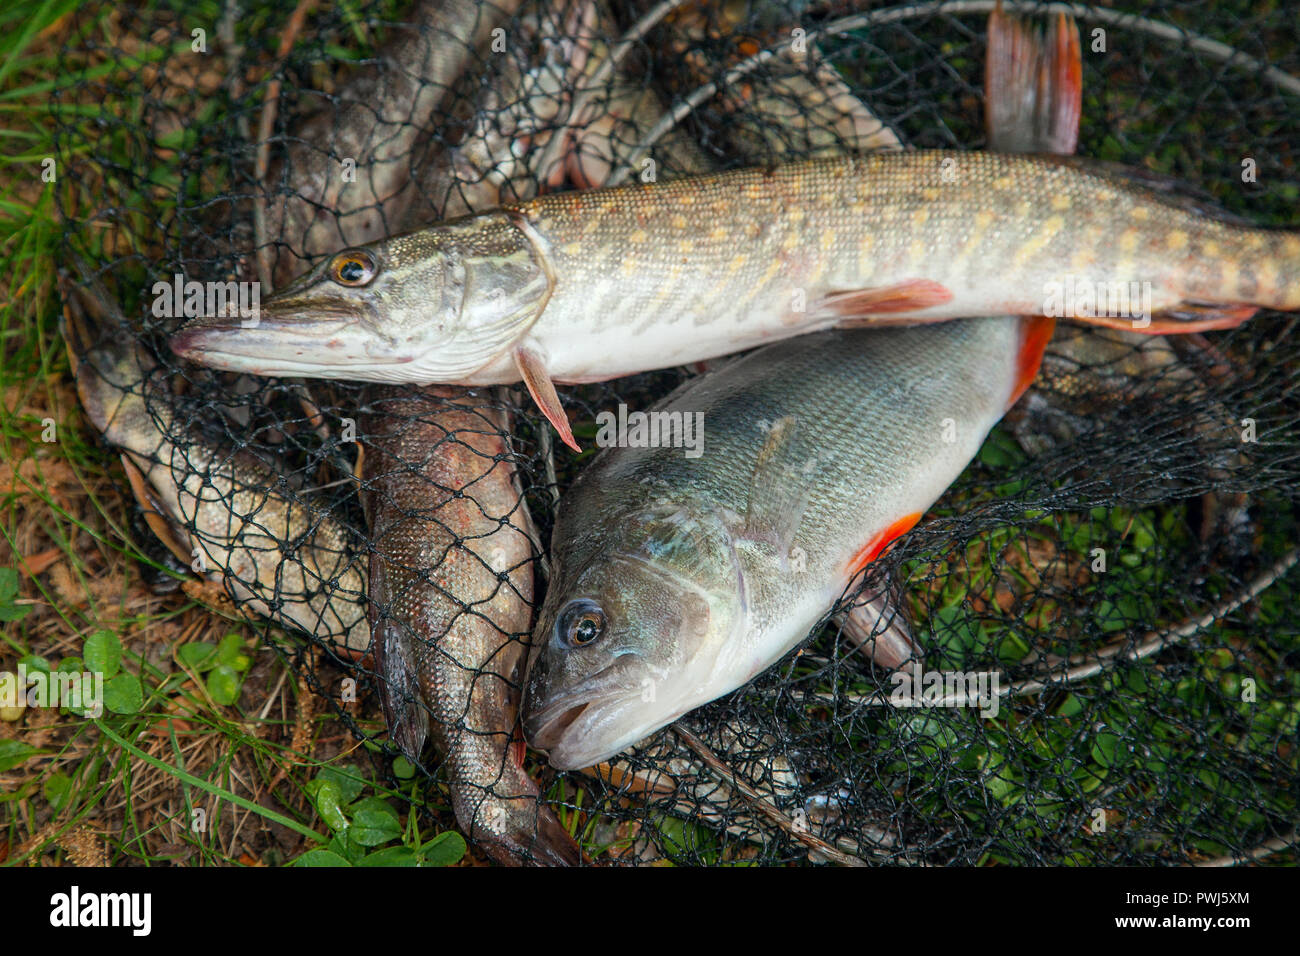 https://c8.alamy.com/comp/PWJ5XM/freshwater-perch-and-northern-pike-fish-know-as-esox-lucius-on-landing-net-and-fishing-equipment-fishing-concept-trophy-catch-big-freshwater-perch-PWJ5XM.jpg